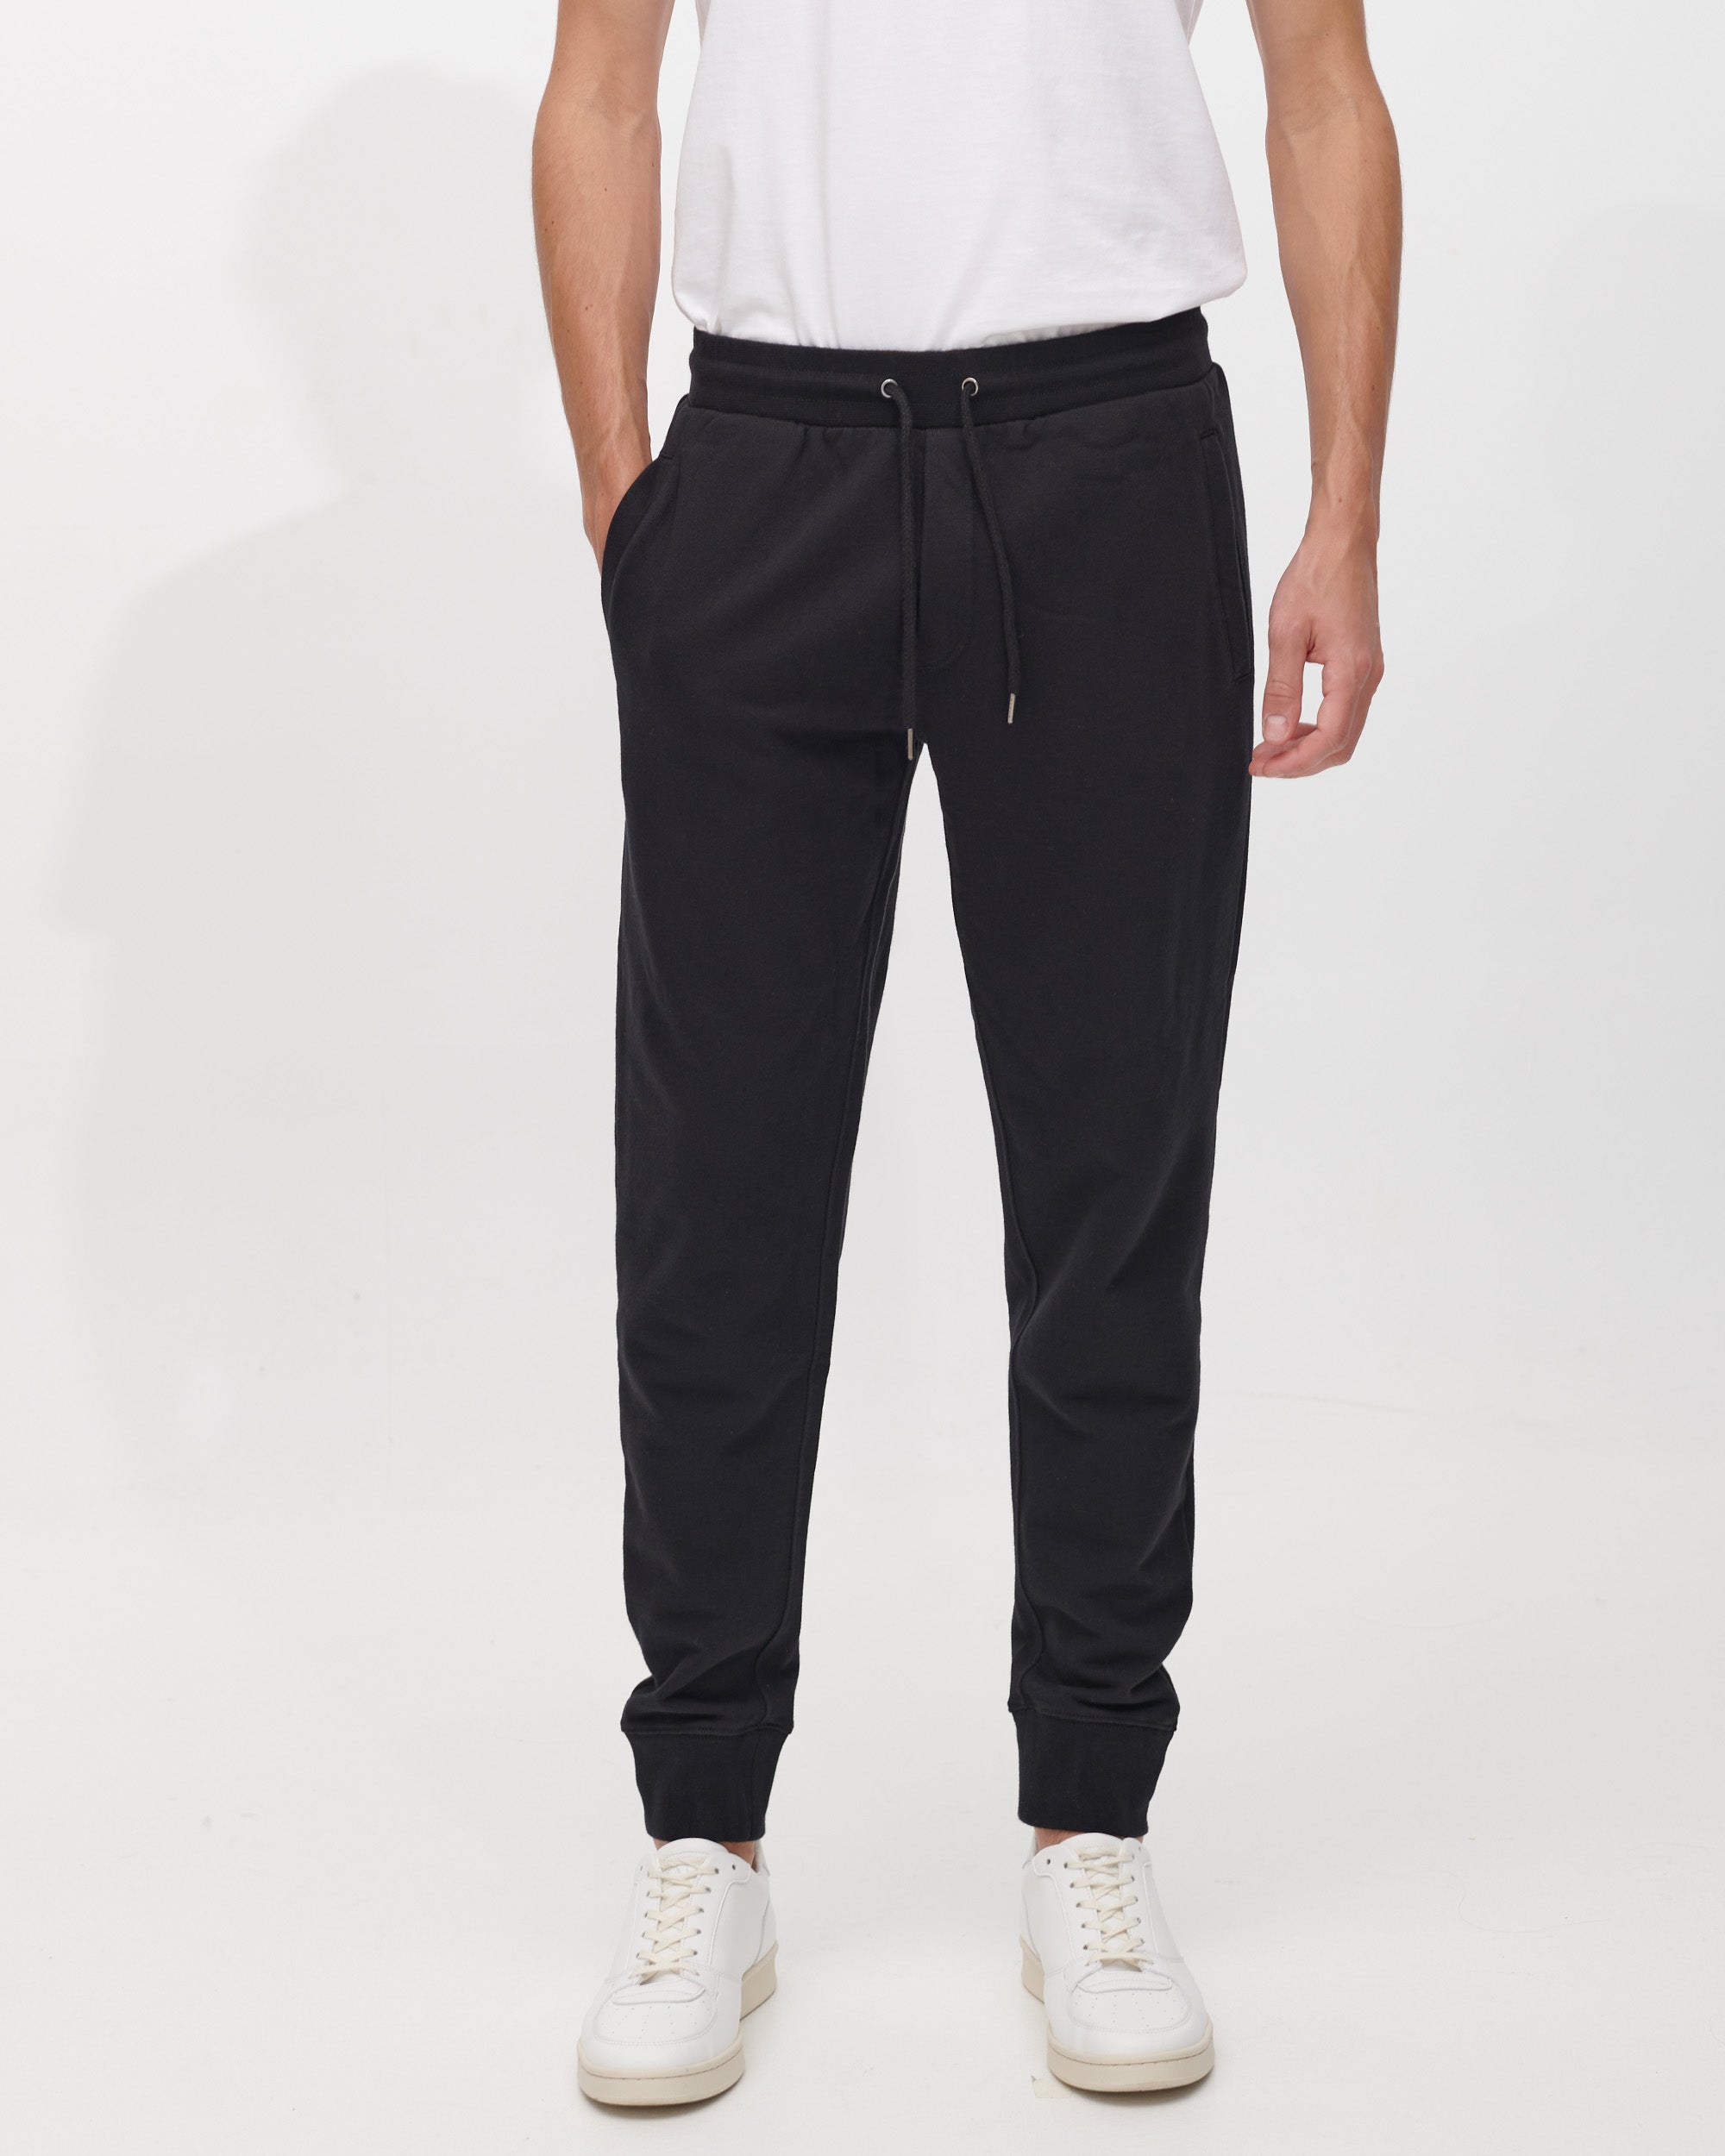 The Perfect Sweatpants for Men  Luxury Cotton Track Pants & Joggers